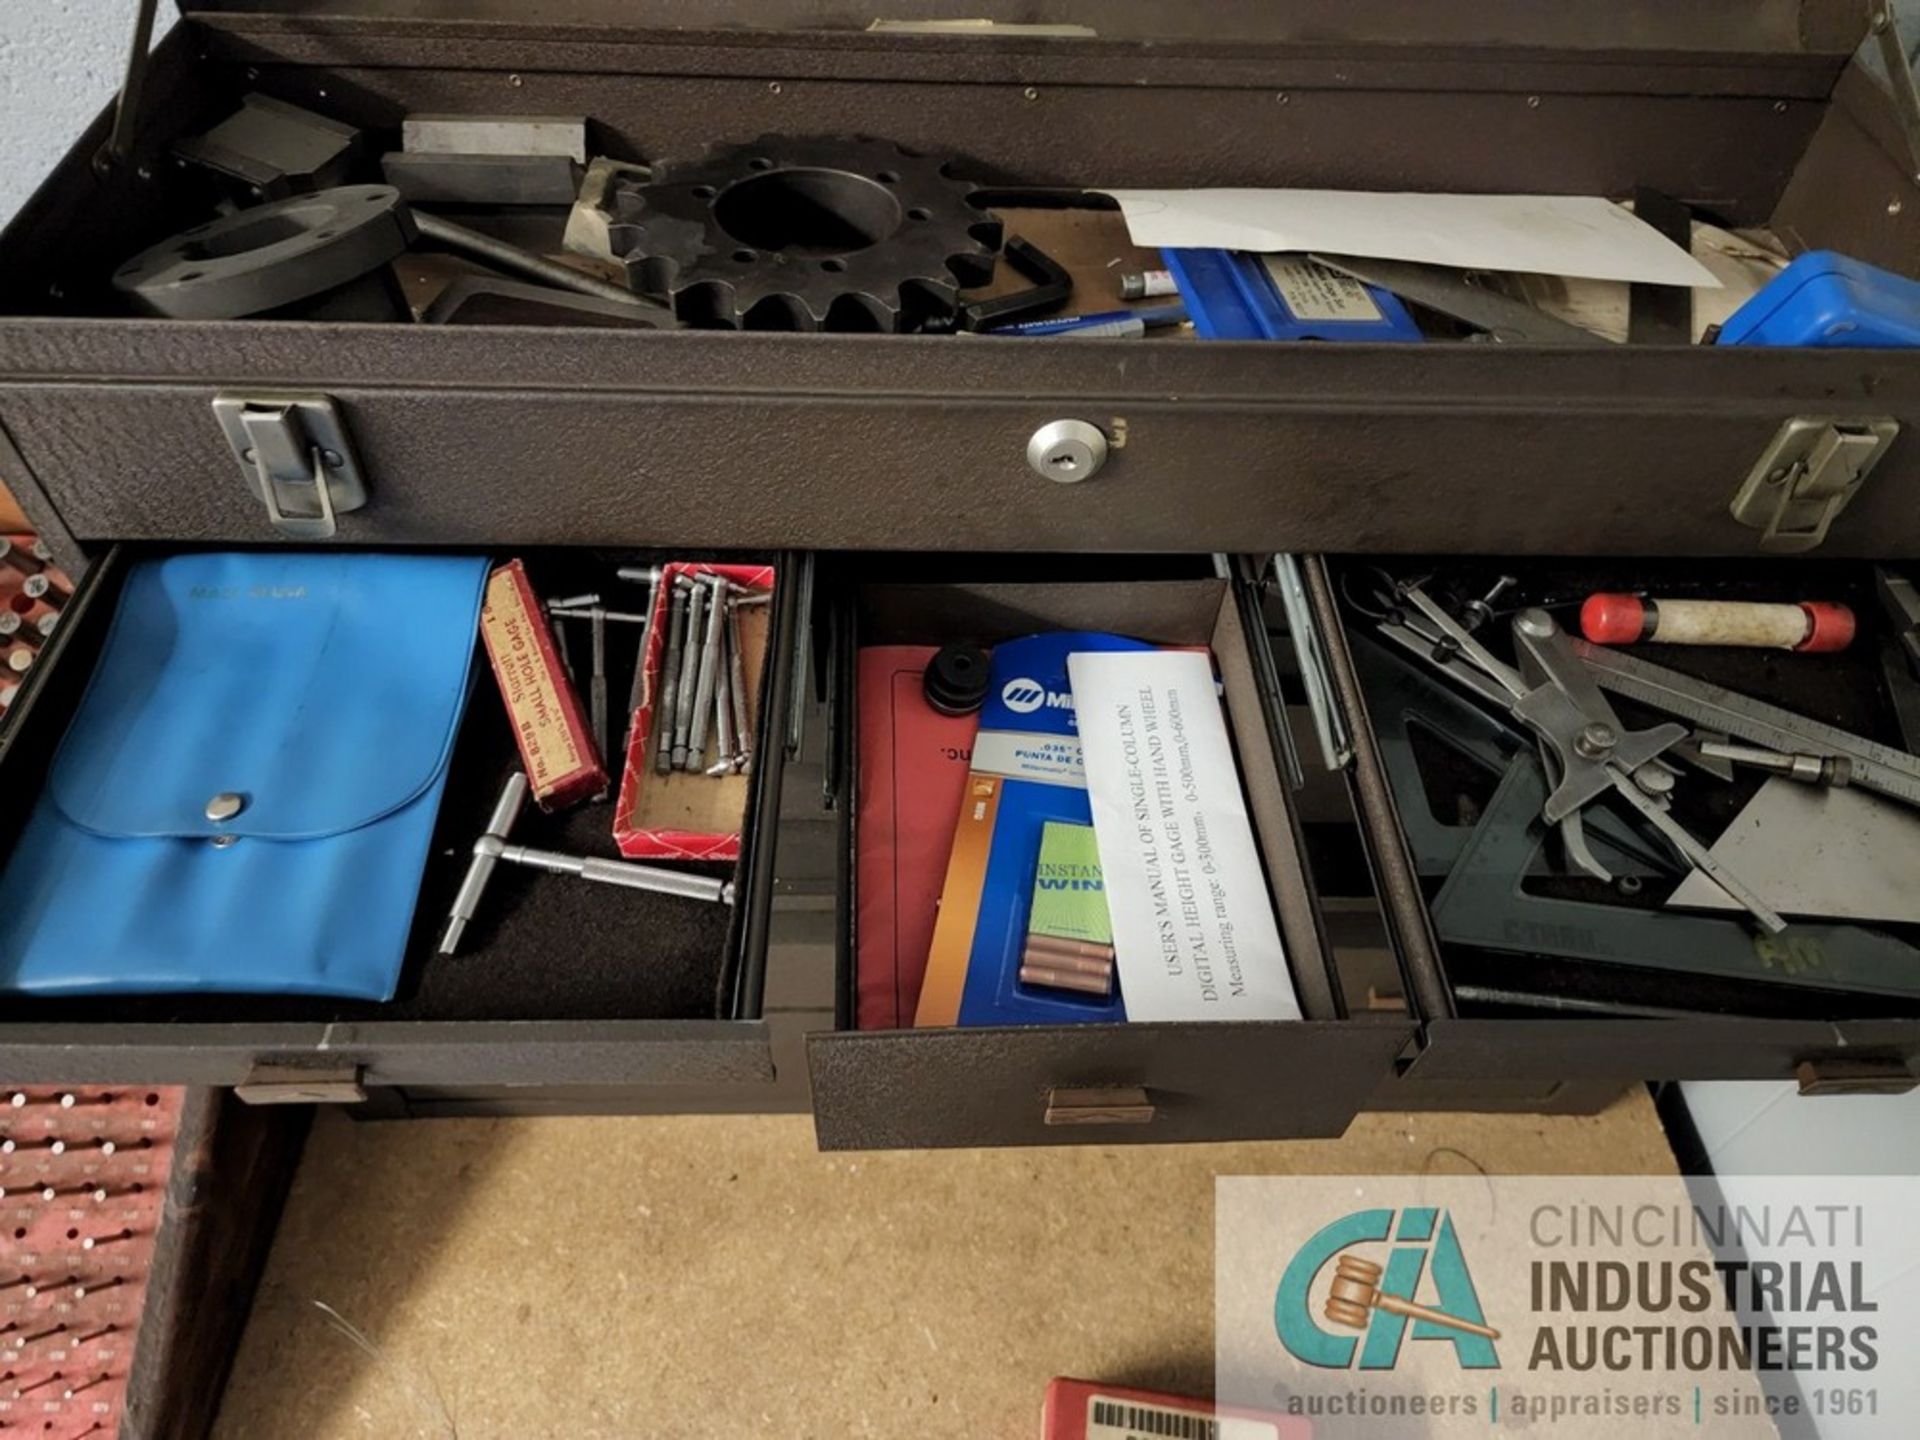 (LOT) KENNEDY TOOL BOX W/ SMALL MOUNT OF INSPECTION ITEMS, PIN GAGE INDEX, PIGEON HOLE CABINET W/ - Image 3 of 11